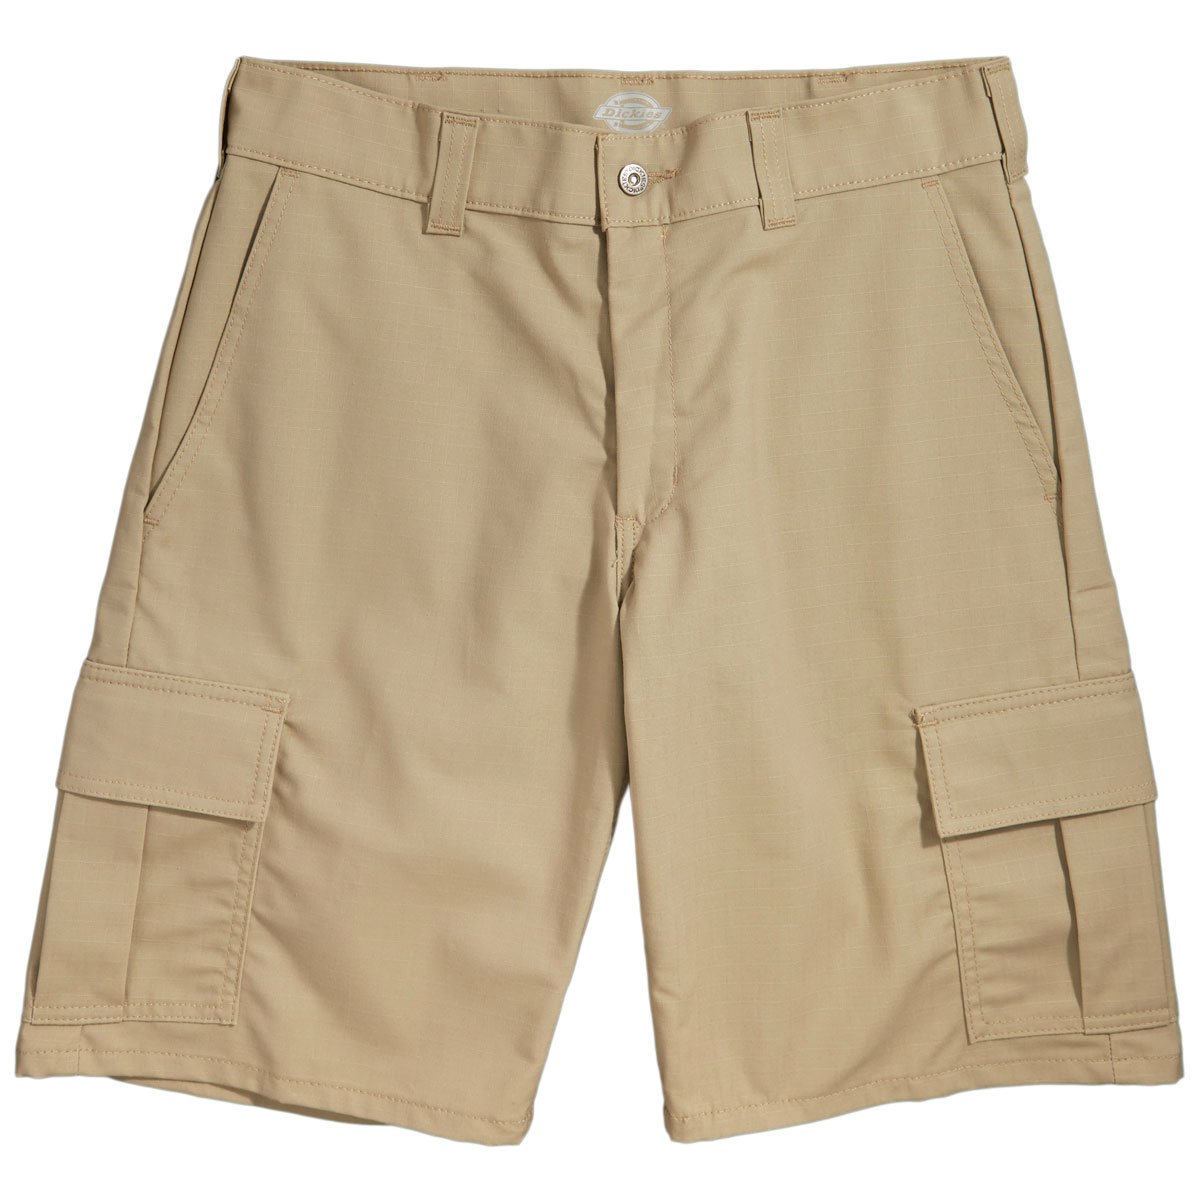 Dickies 67 Collection Cargo Shorts - Desert Sand image 1